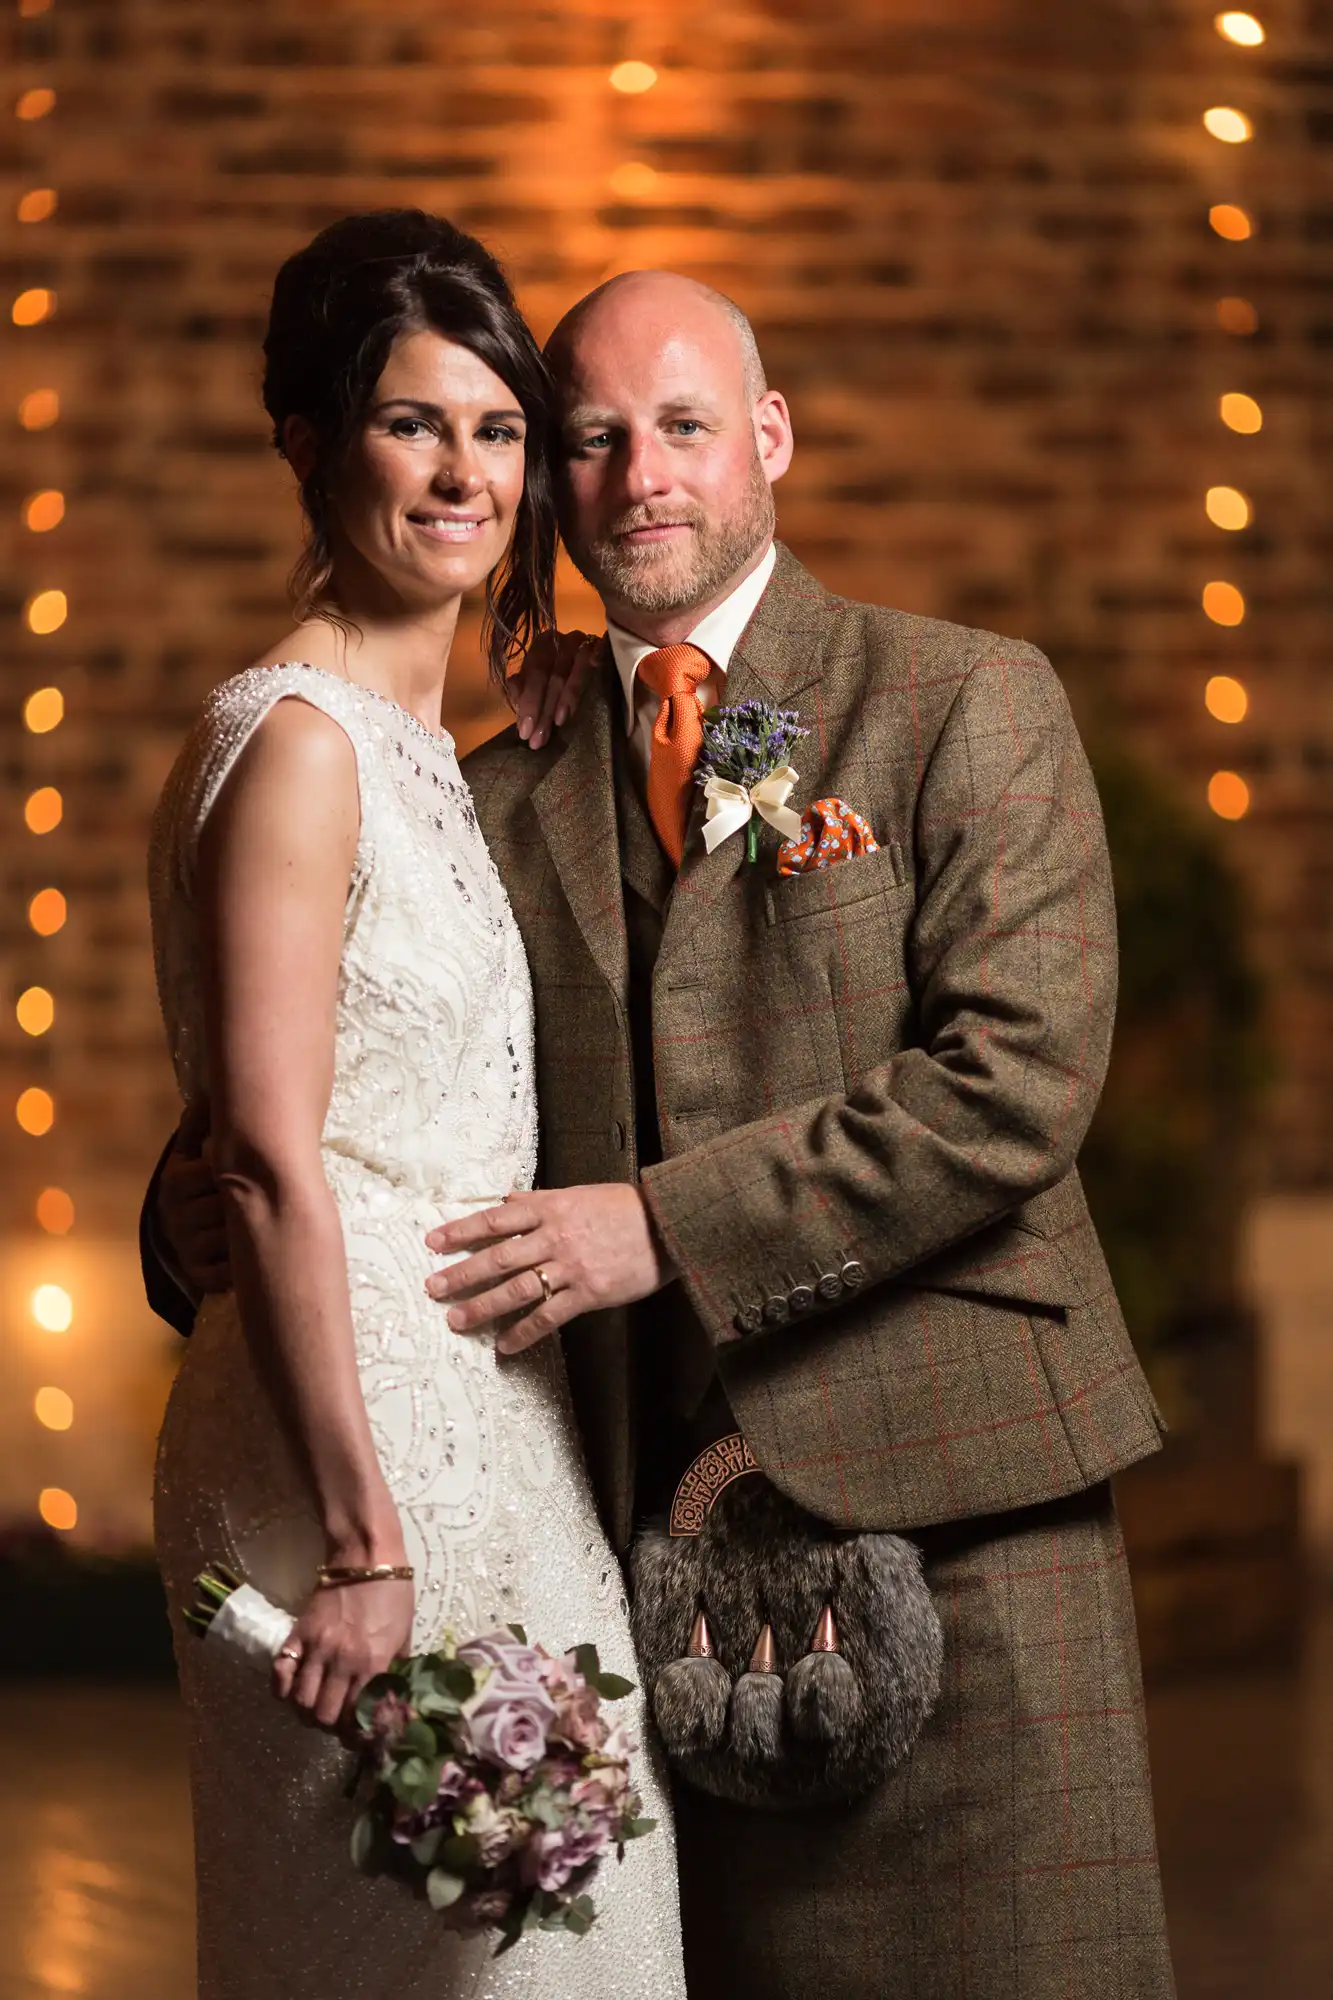 A bride in a lacy white dress and a groom in a tweed suit pose together, holding a bouquet, against a brick wall backdrop lit with warm lights.